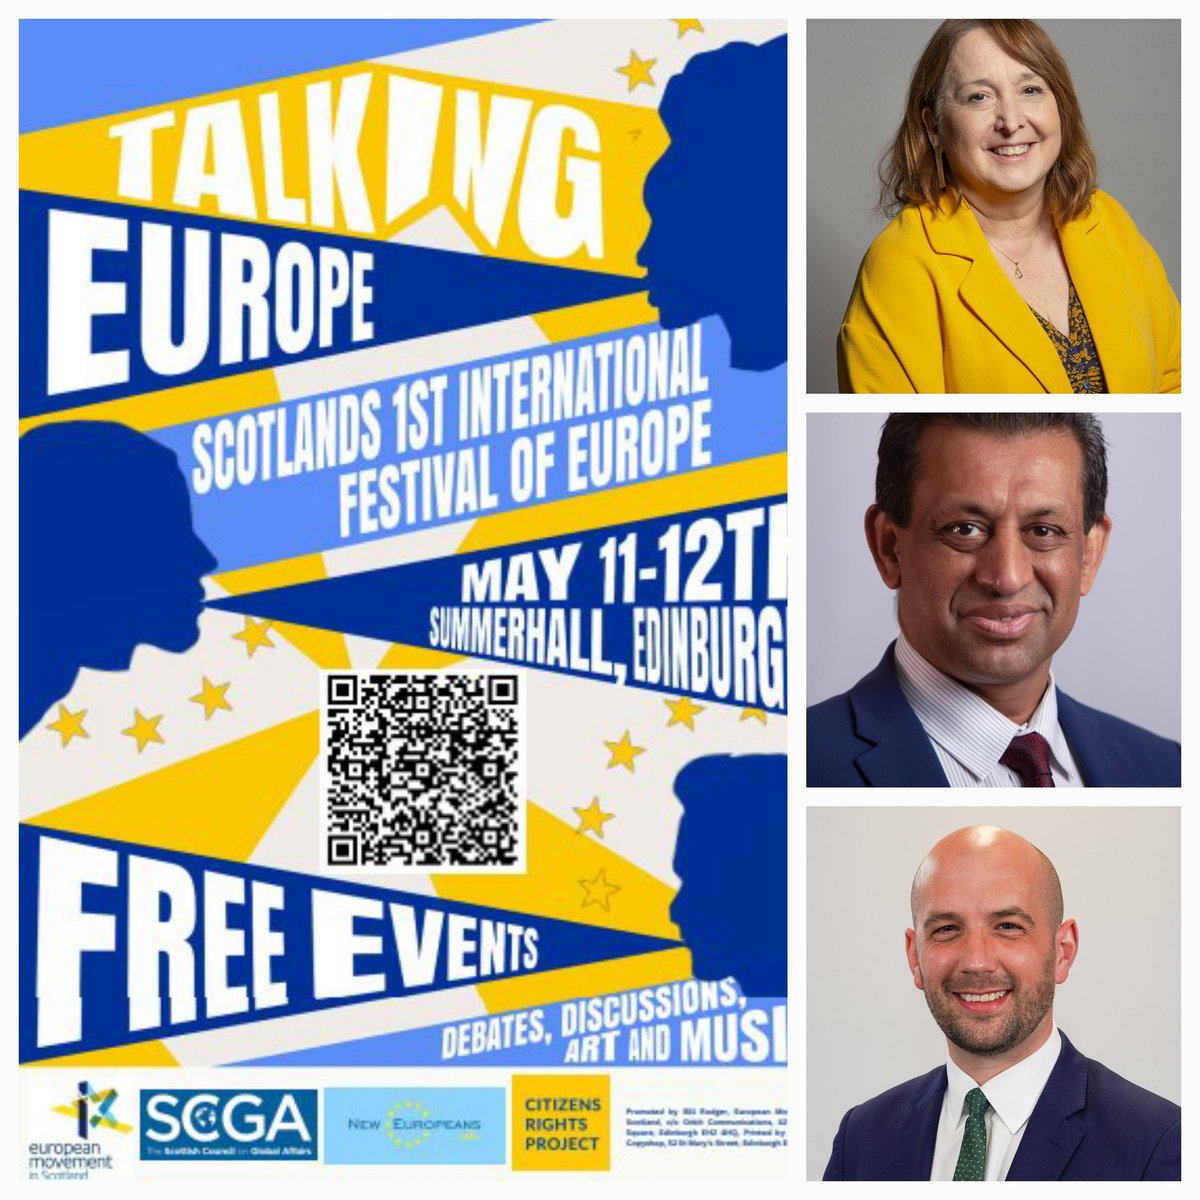 To close #TalkingEurope we'll be asking a political panel of @FoysolChoudhury @cajardineMP @BenMacpherson about the steps Scotland can take to strengthen links with the EU & wider Europe This session starts @ 5pm on Sunday May 12. Free ticket here 👉 tickettailor.com/events/europea…